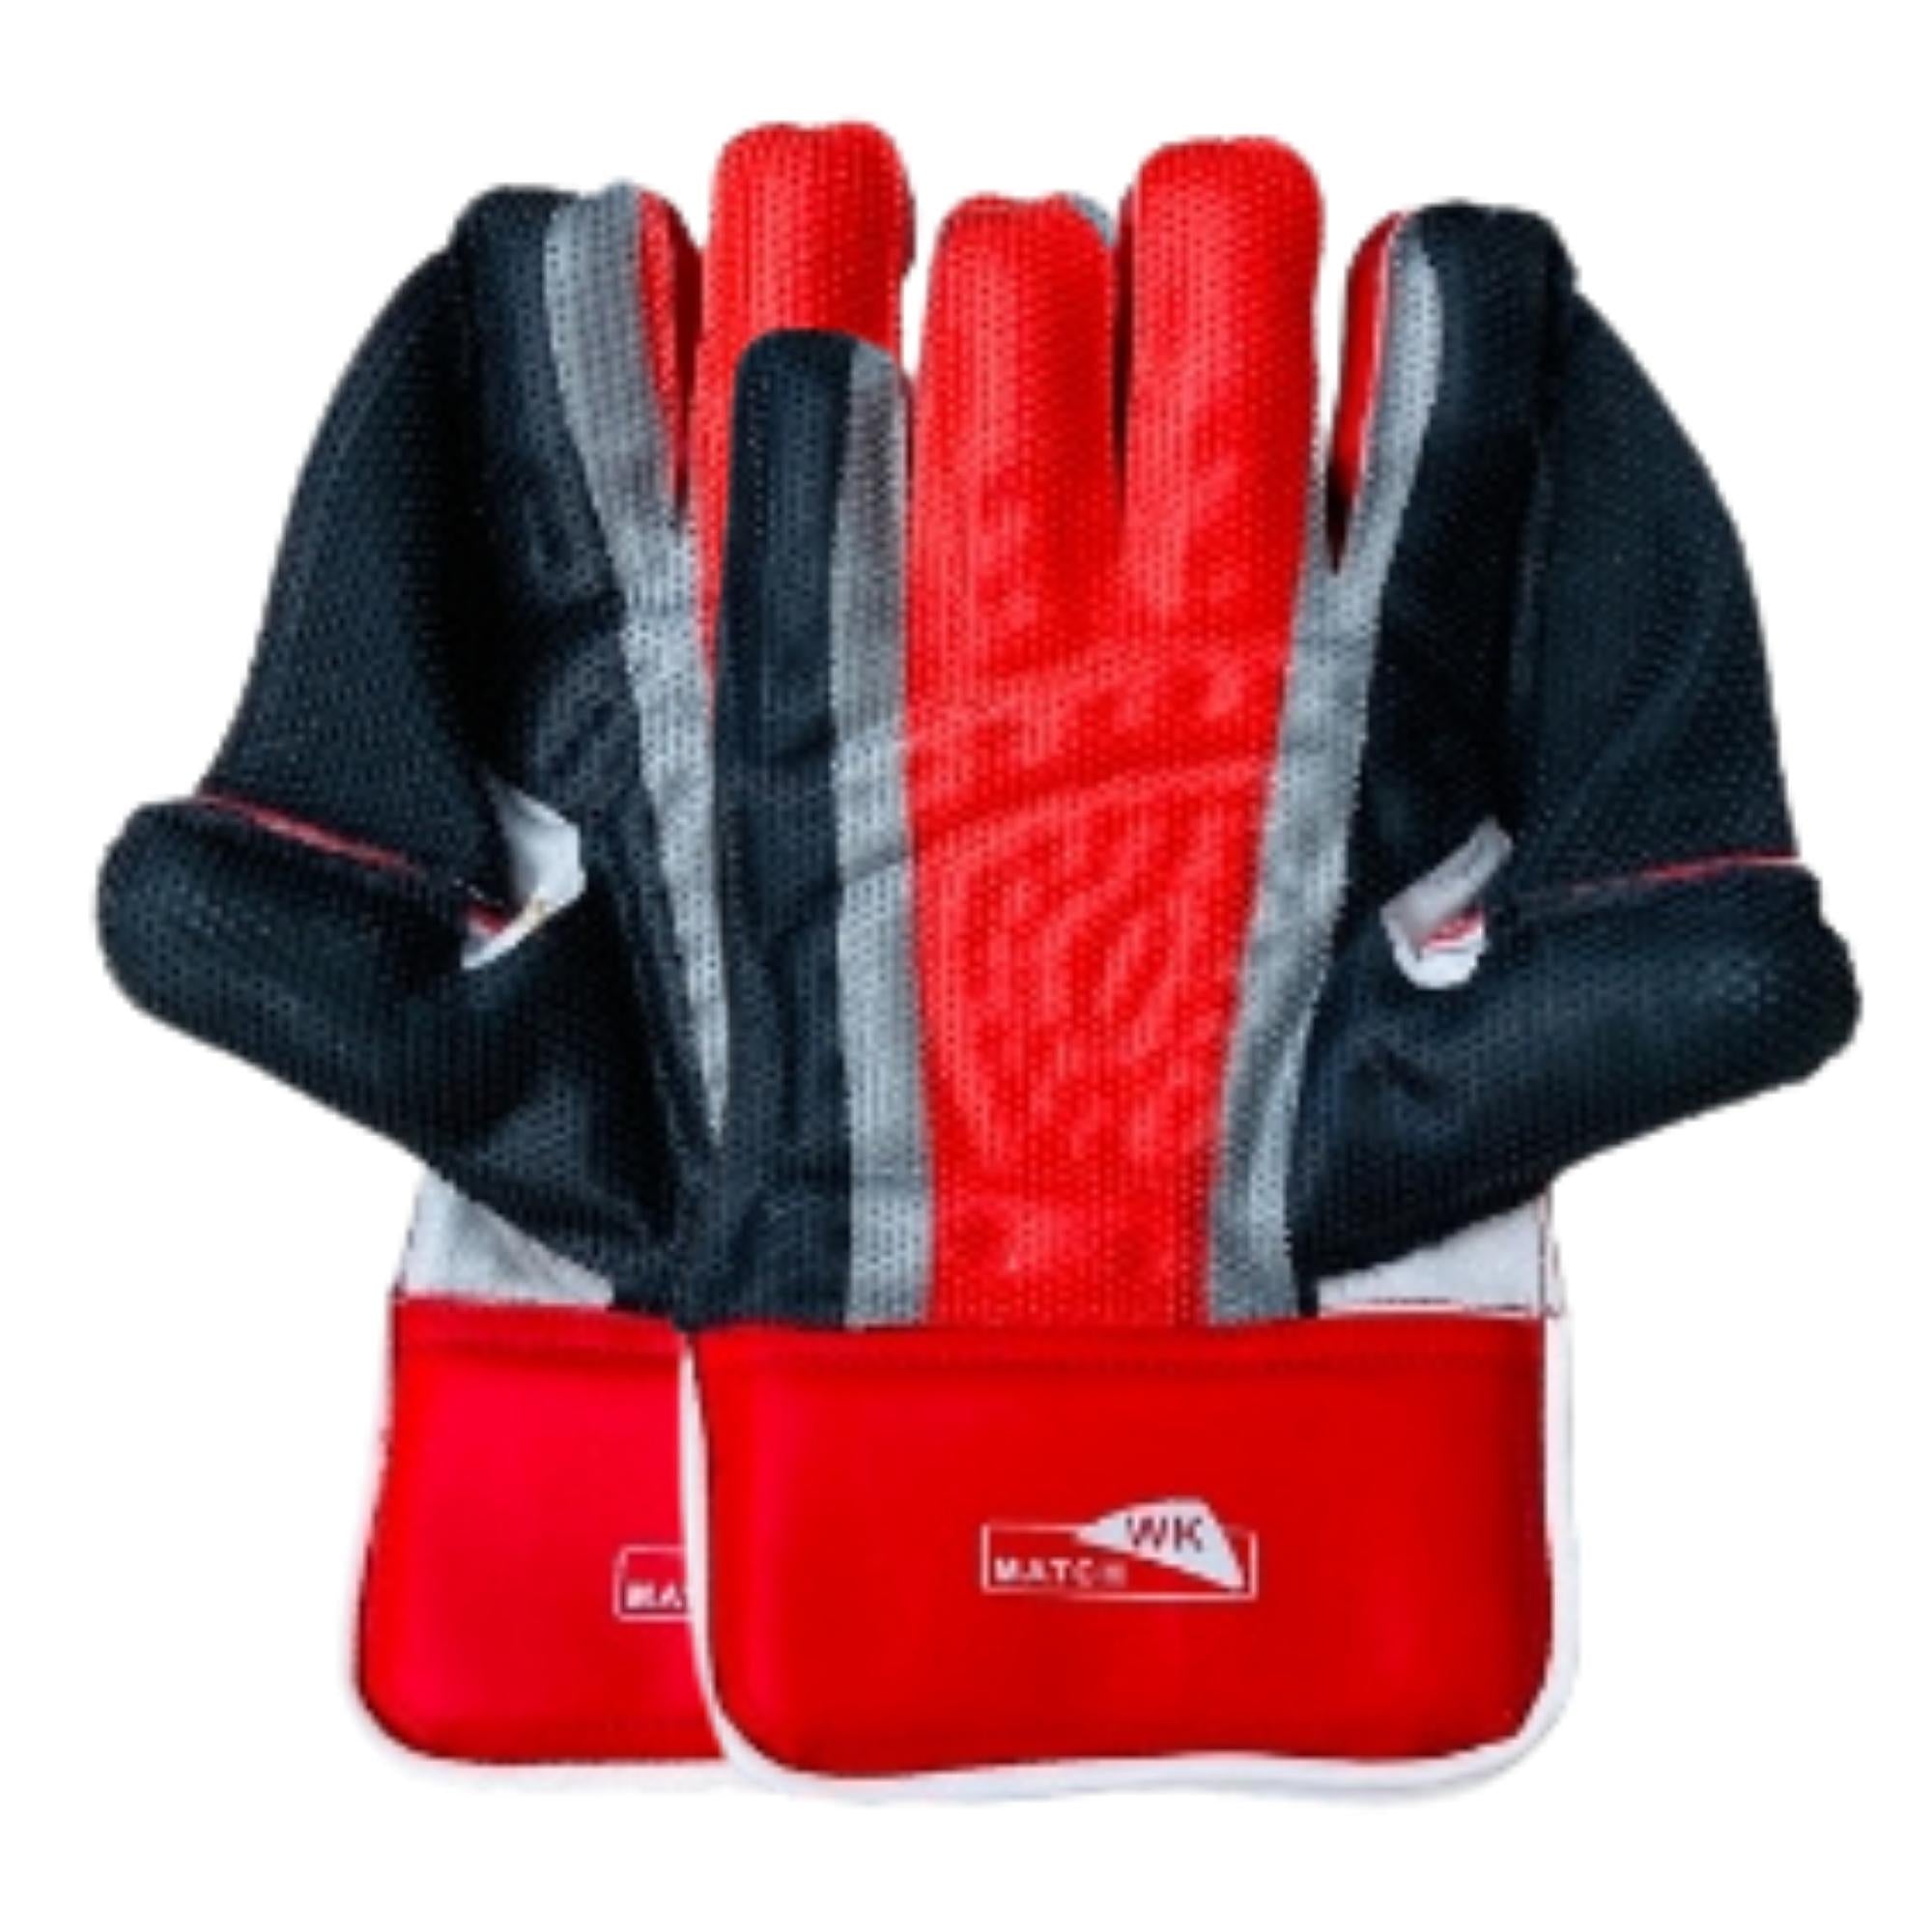 SS Match Wicket Keeping Youth Gloves